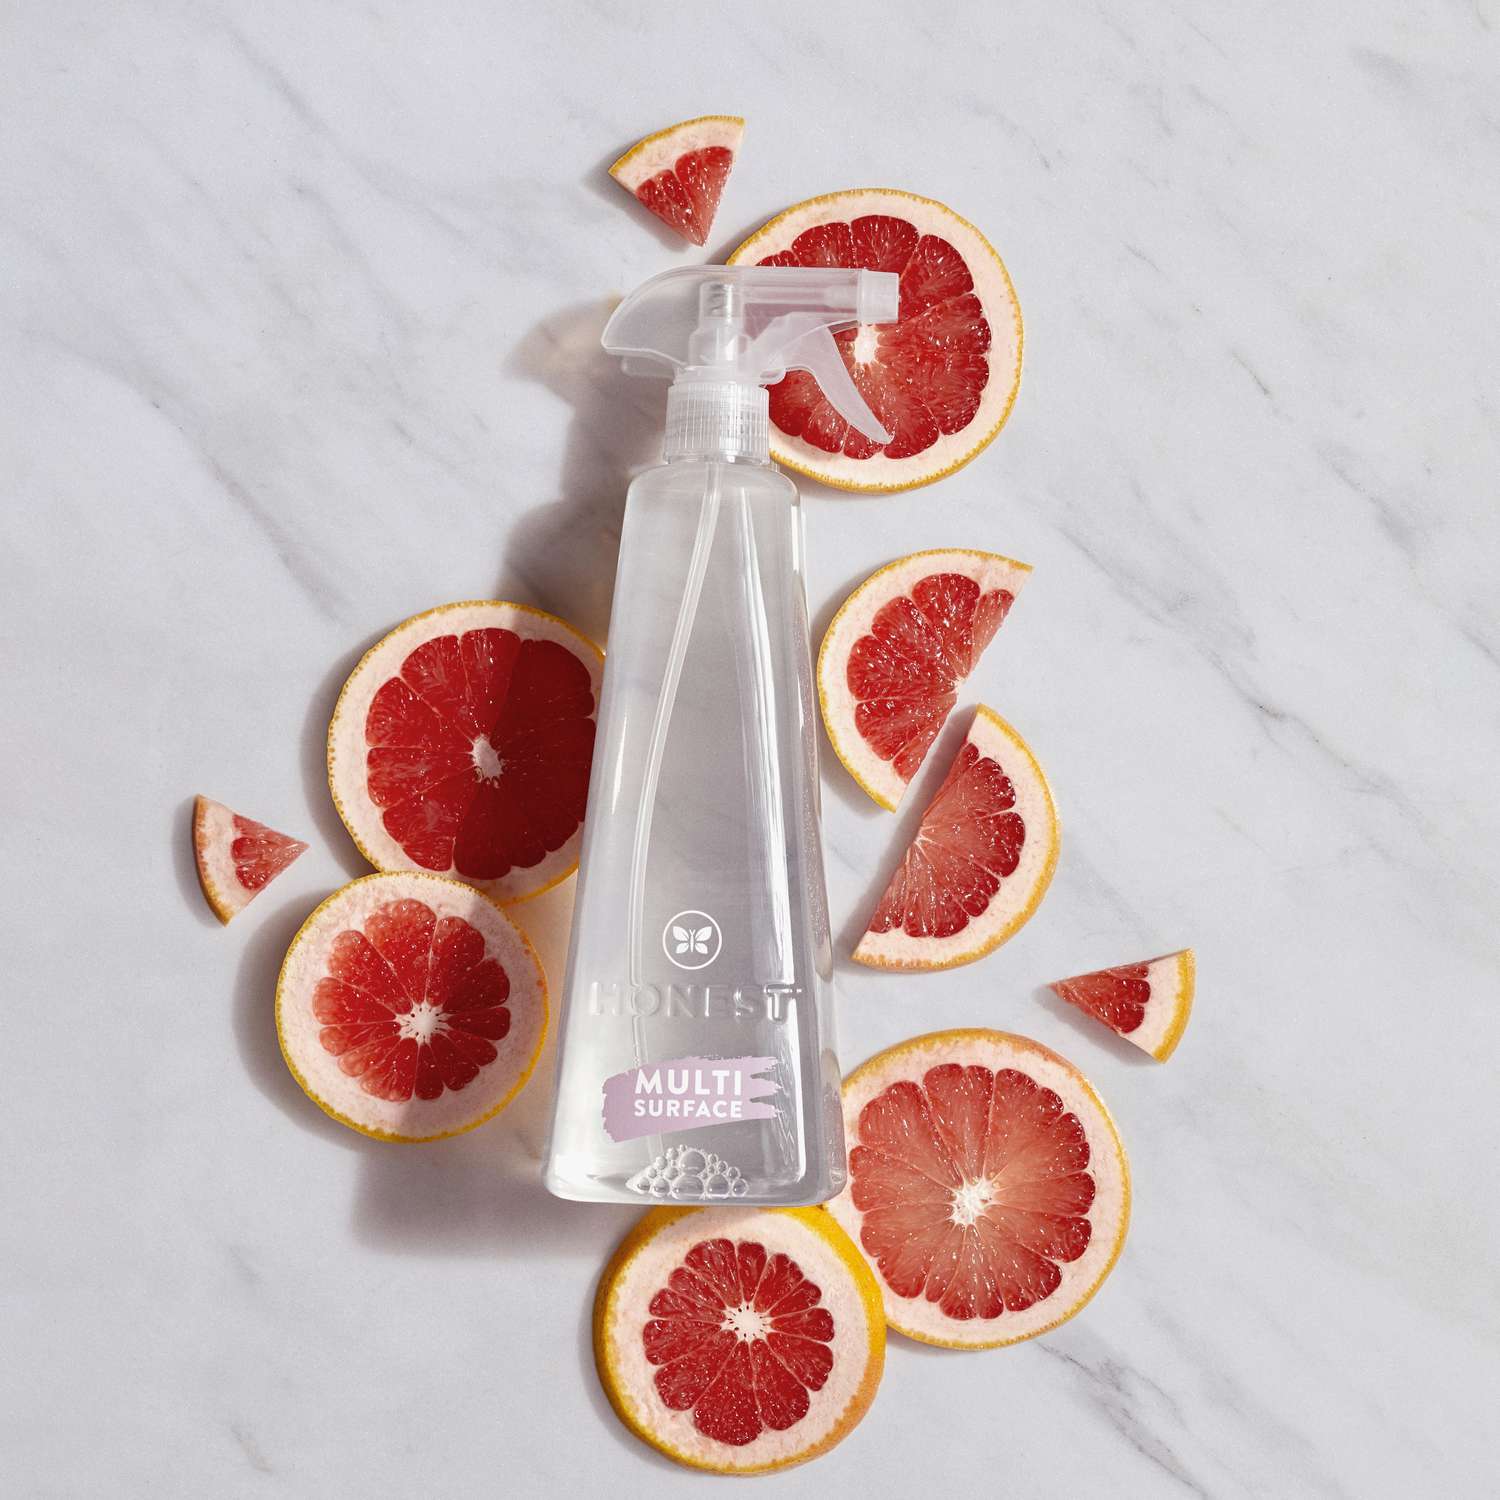 pomelo-scented Honest multi-surface cleaner